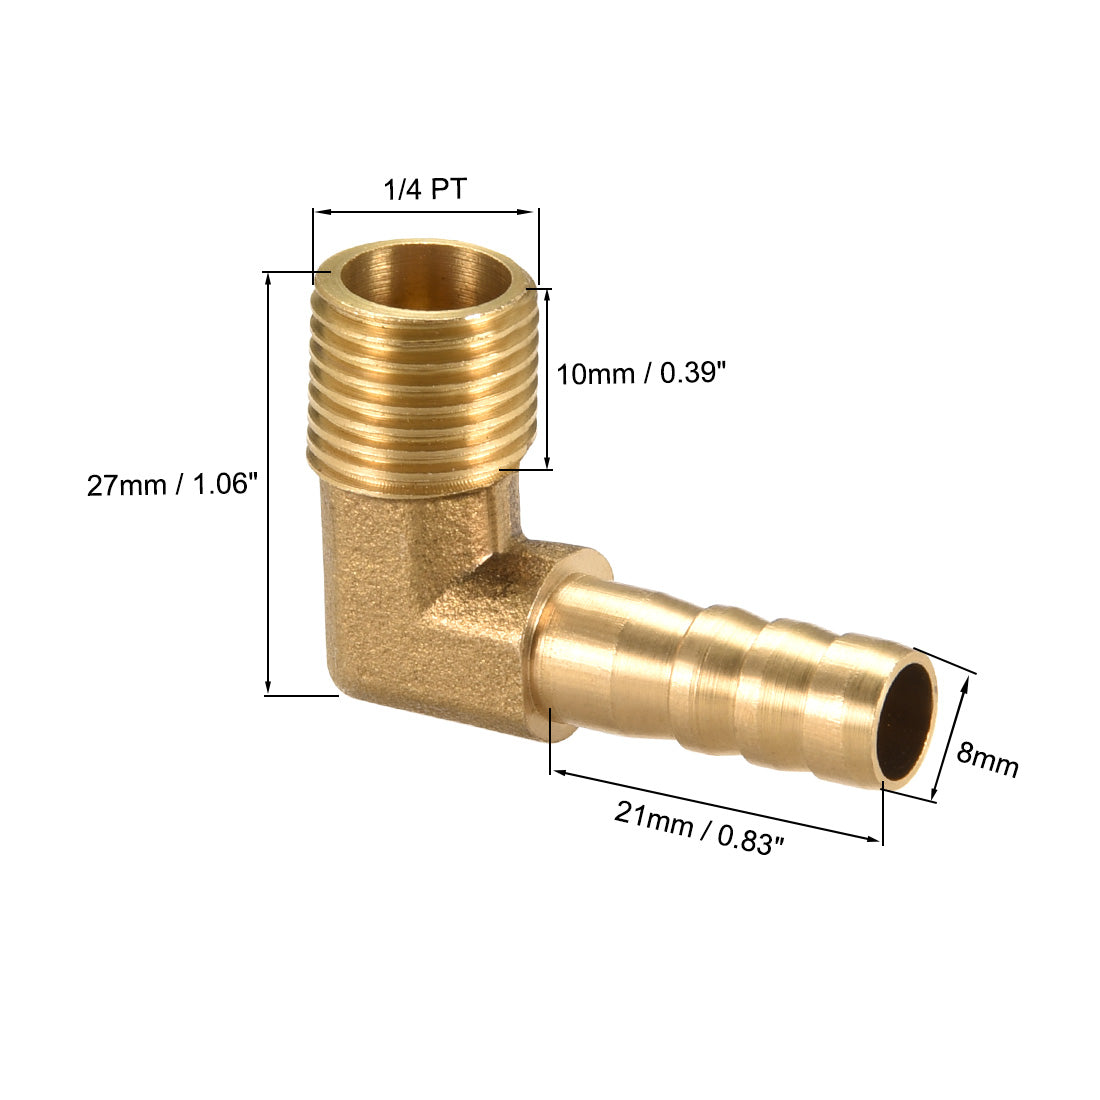 Uxcell Uxcell Brass Barb Hose Fitting 90 Degree Elbow 12mm Barbed x 1/4 PT Male Pipe 3pcs